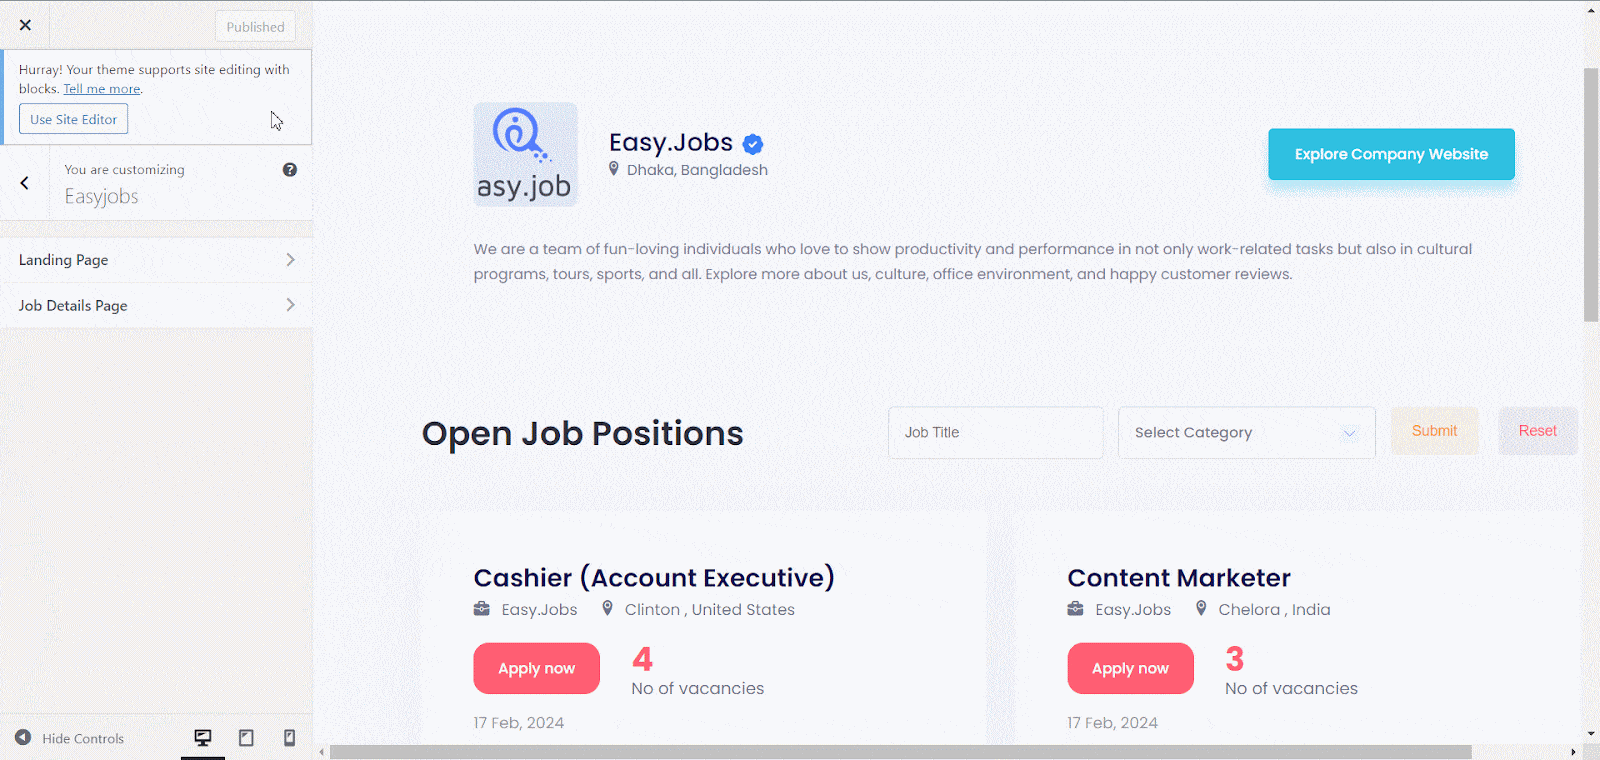 easy.jobs-job-detail-page